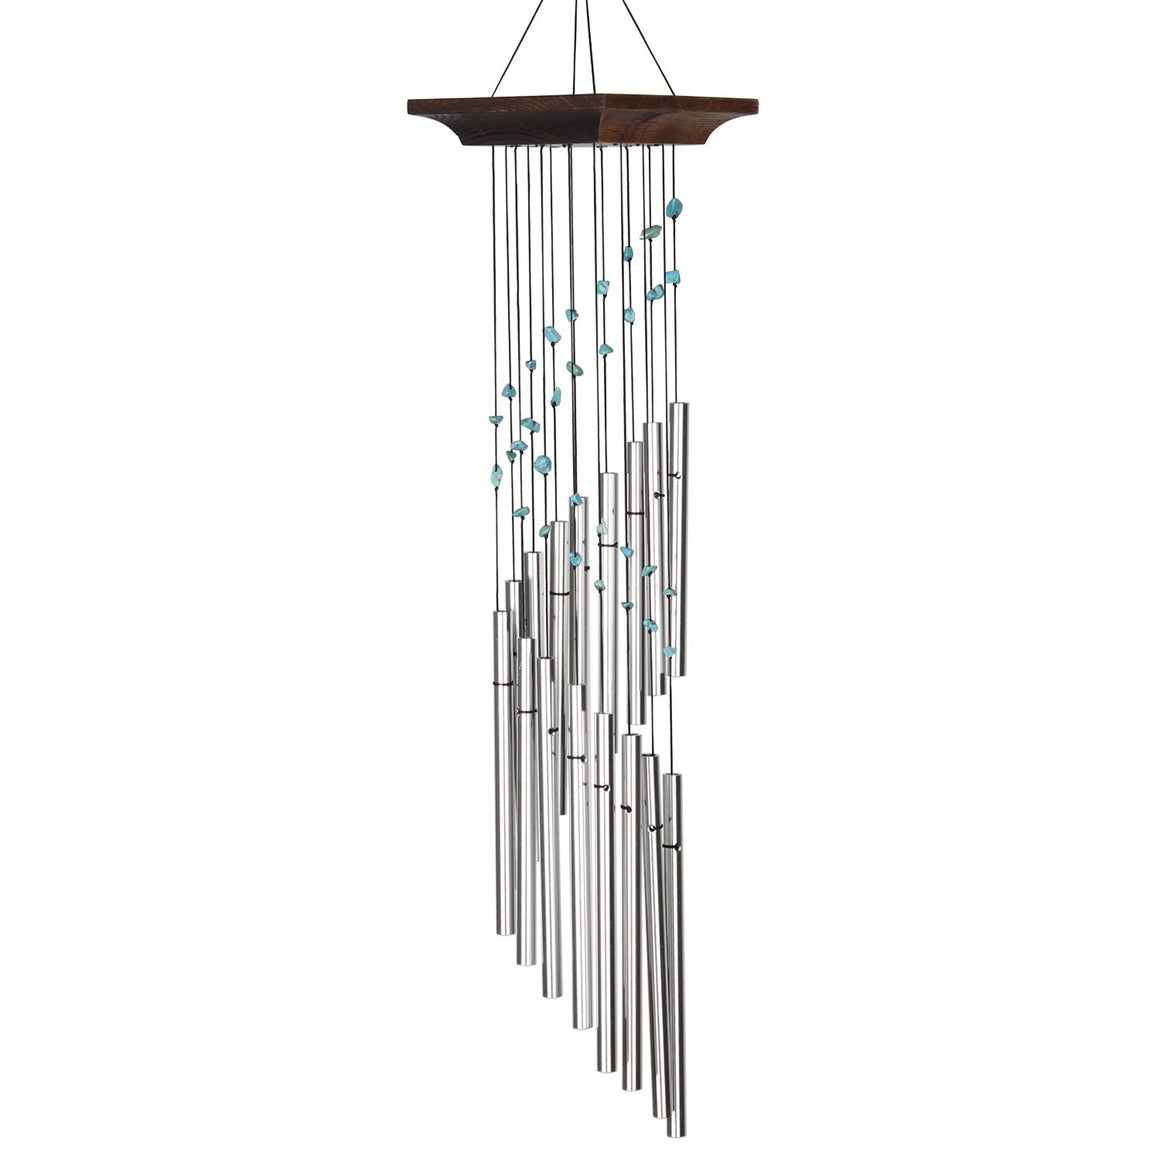 Woodstock Mystic Spiral Chime - Turquoise